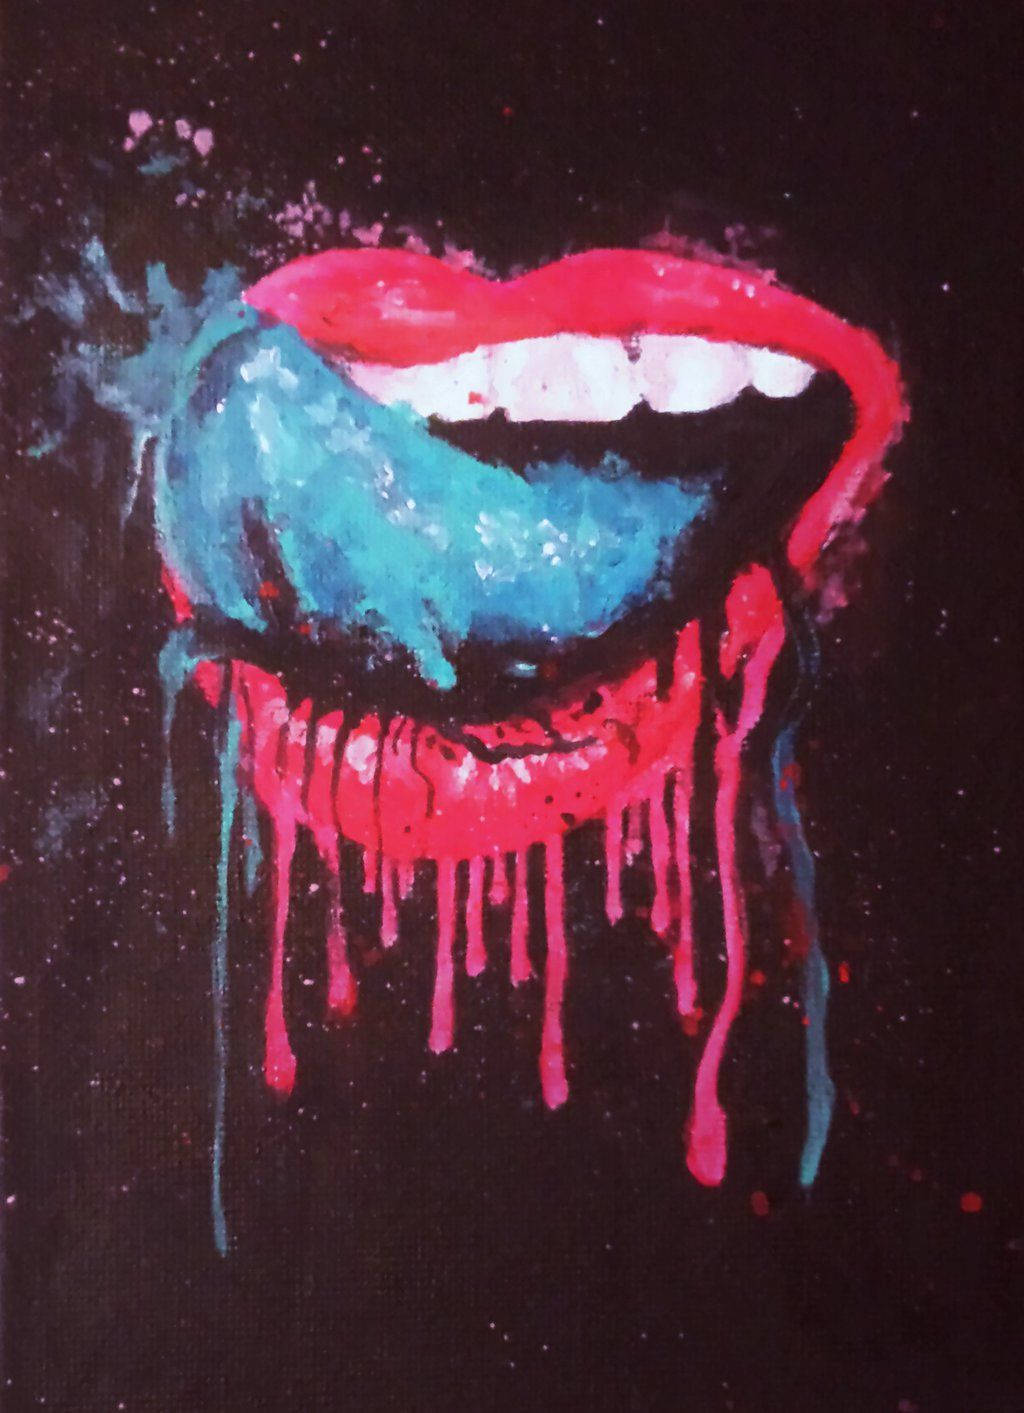 Stunning Artwork Of A Cool Dripping Mouth Background